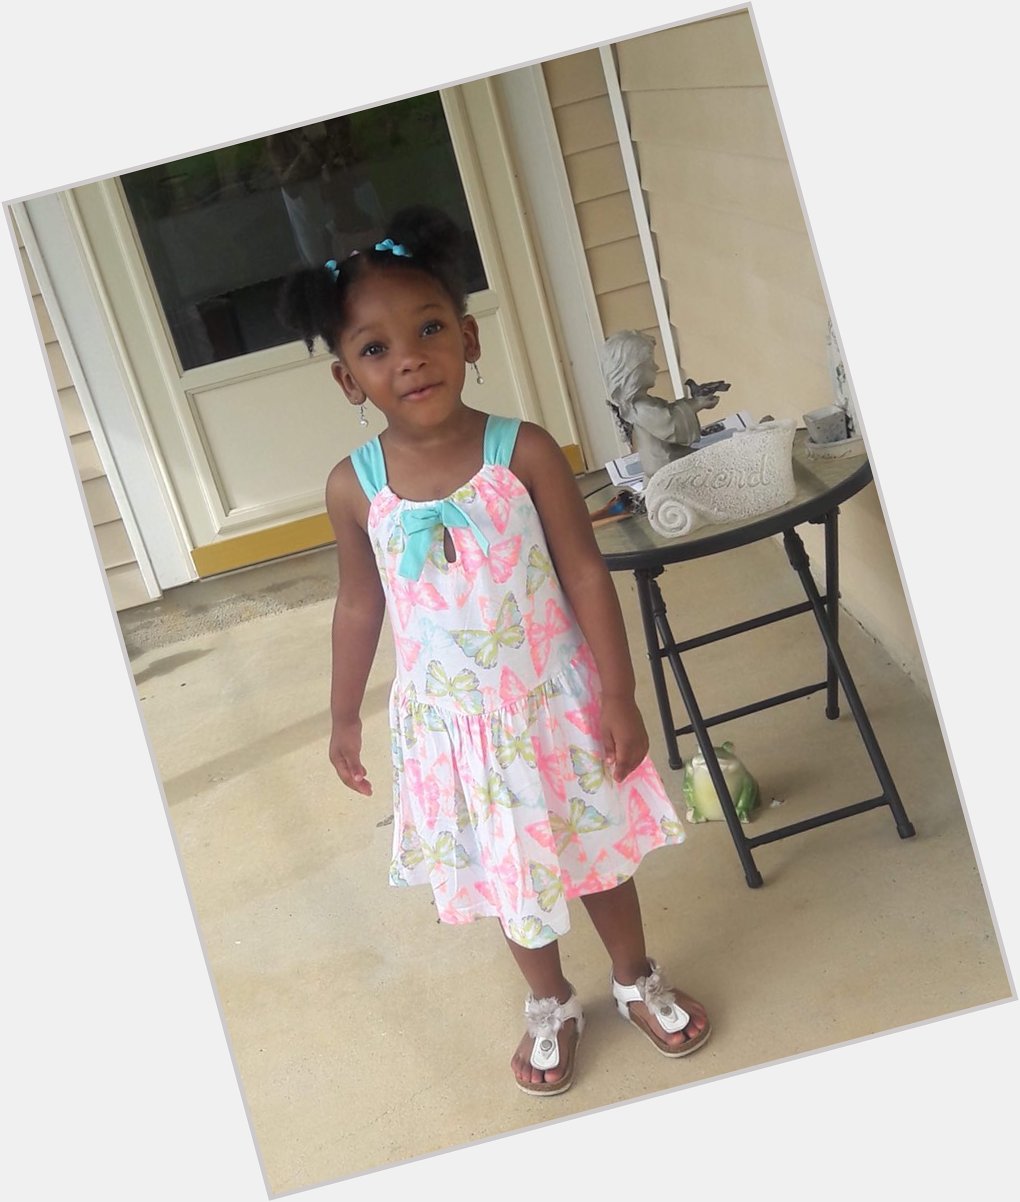 Her Allen Iverson year can t believe my babies 3 already but just look at her   Happy Birthday princess  